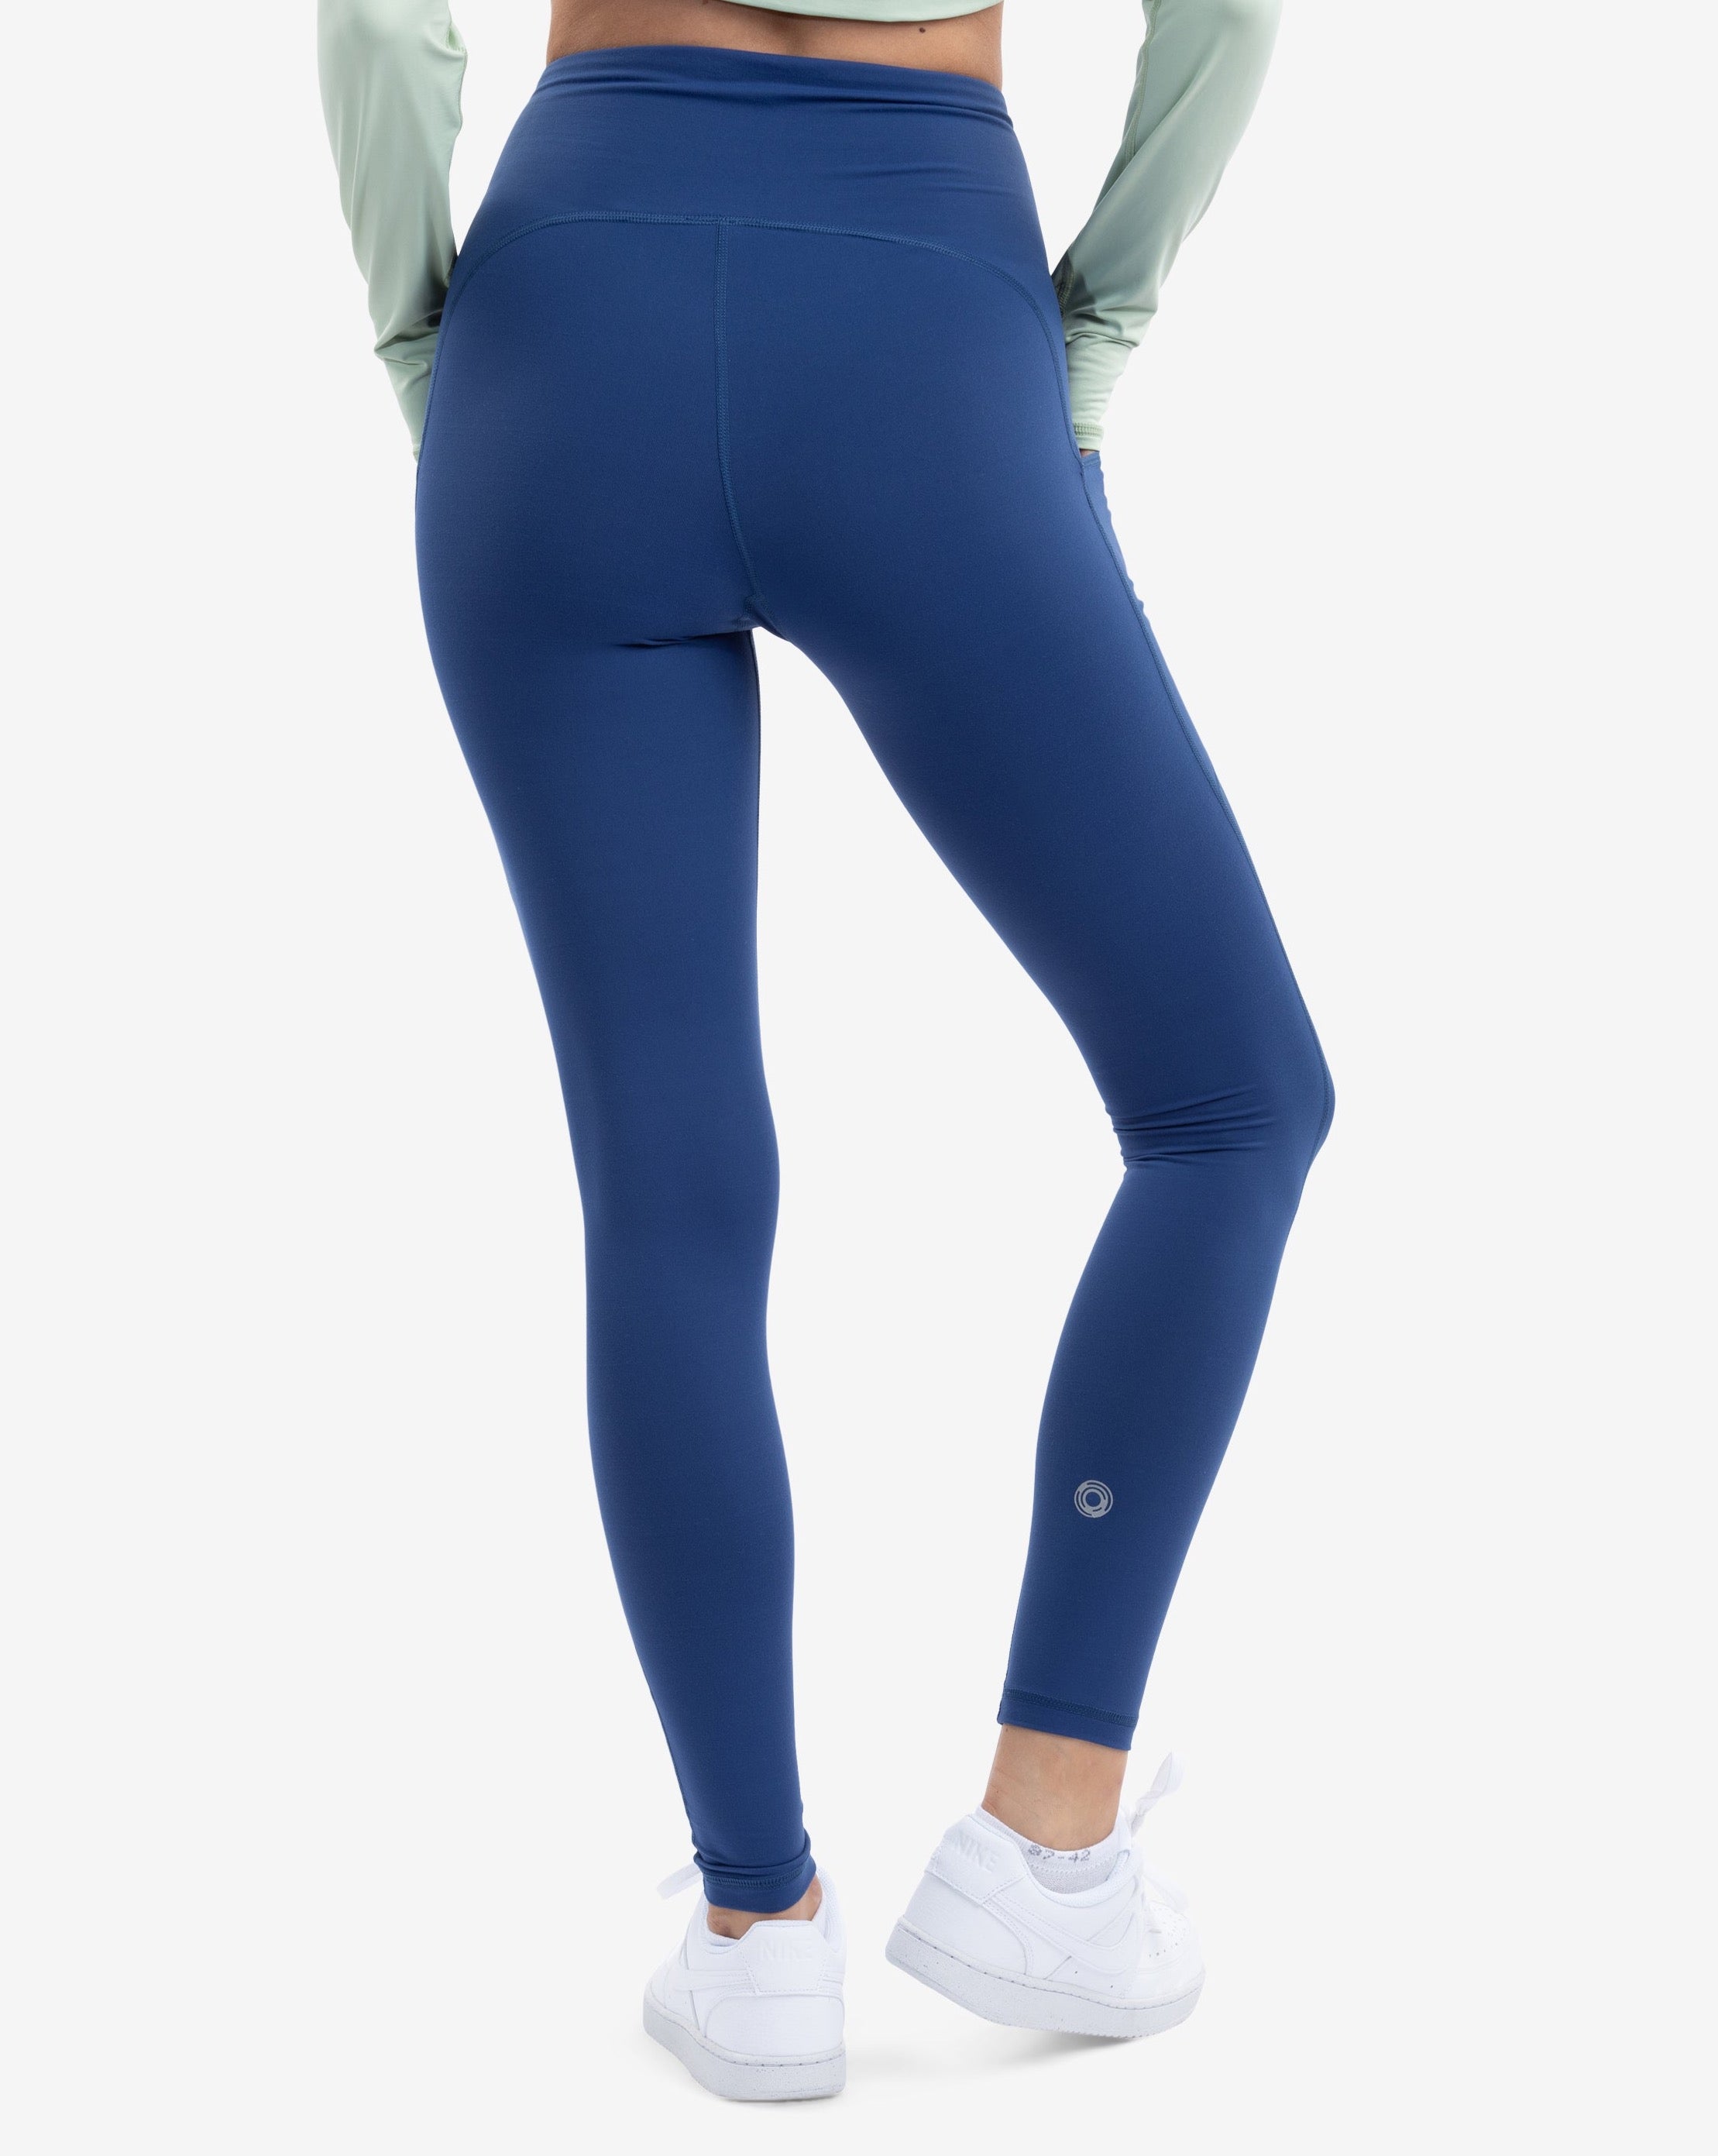  Yoga Tights and Tops,Royal Blue Compression Tights,Yoga Tight  Leggings,Navy Compression Tights,High Compression Tights,Use of Compression  Tights,Pink Tight Pants, : Clothing, Shoes & Jewelry